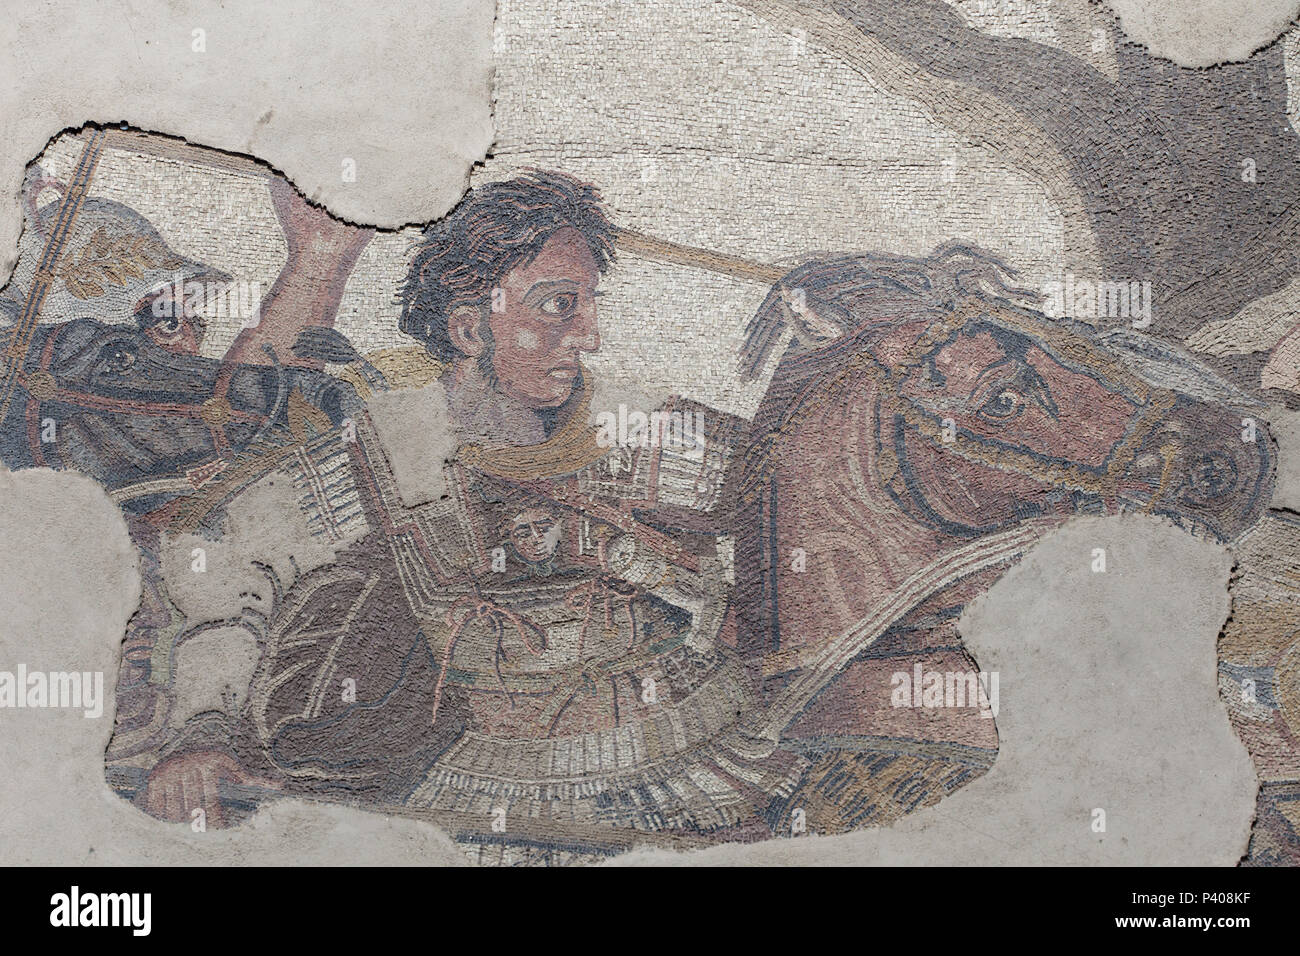 Alexander the Great depicted in the Alexander Mosaic in the House of the Faun (Casa del Fauno) in the archaeological site of Pompeii (Pompei) near Naples, Campania, Italy. The original mosaic is now housed in the National Archaeological Museum (Museo Archeologico Nazionale di Napoli) in Naples. The copy is installed on the place where the original was unearthed. Stock Photo